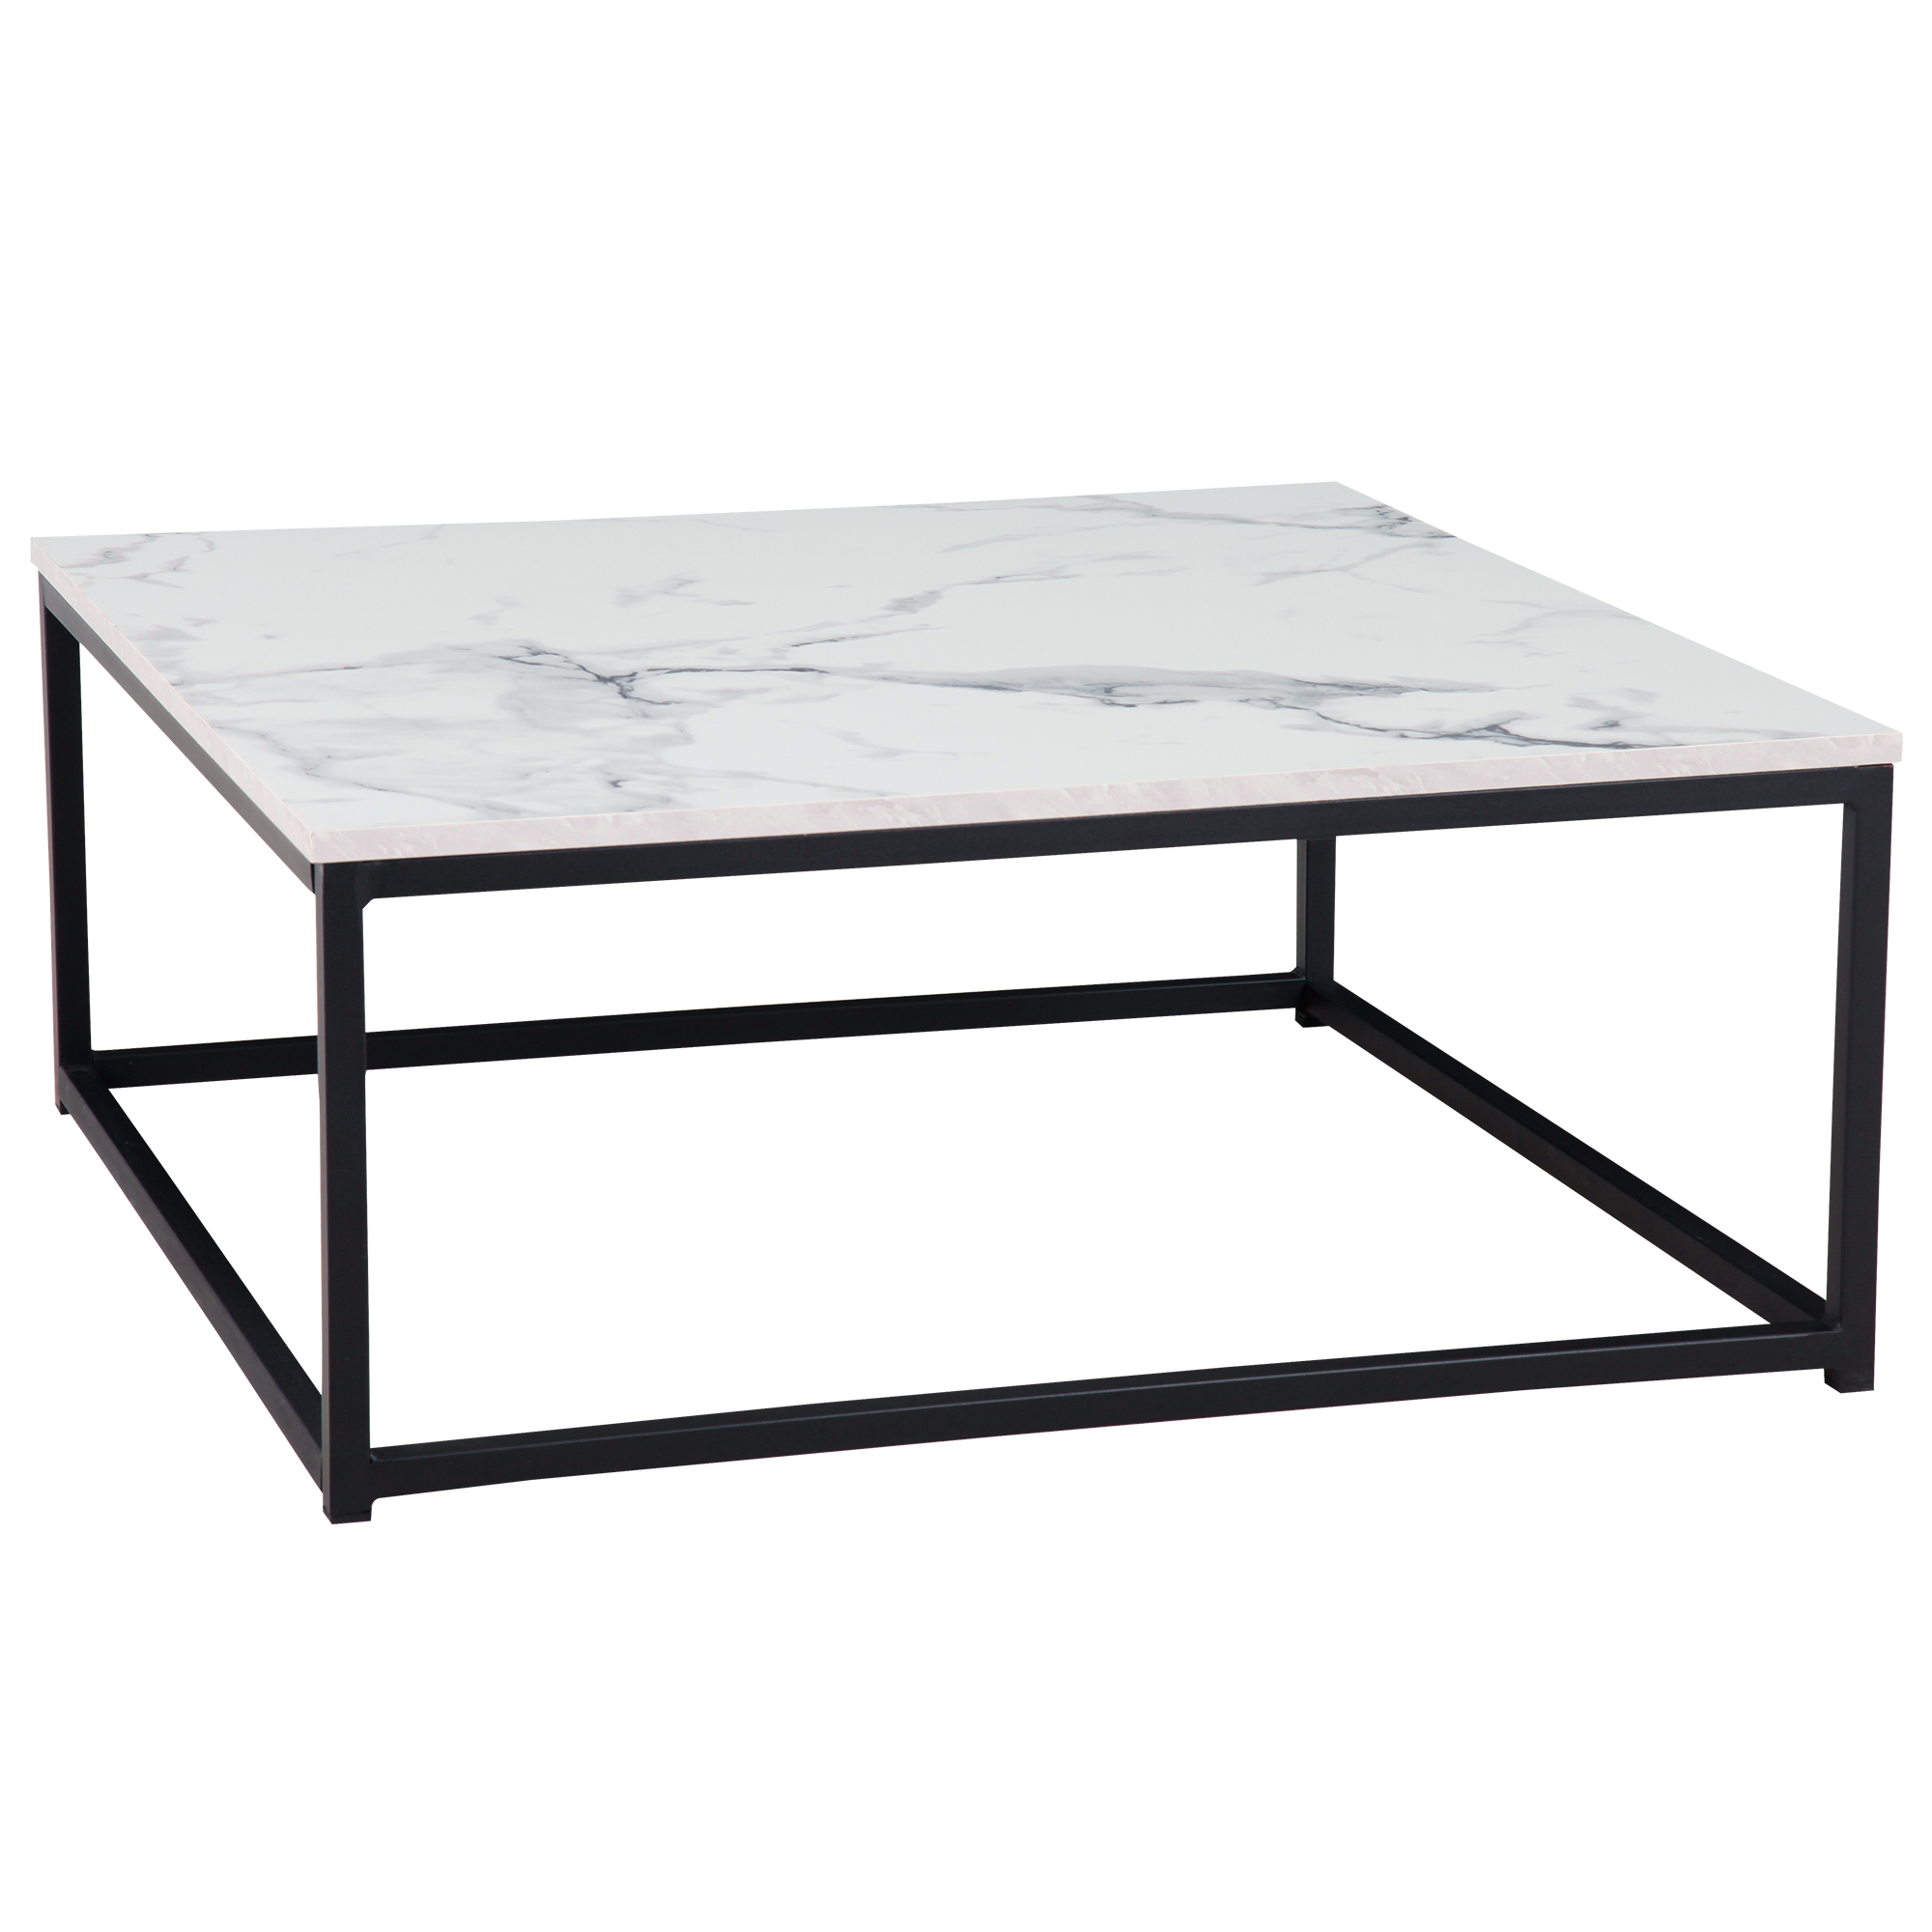 COFFEE TABLE(WHITE) （square ）+for kitchen, restaurant, bedroom, living room and many other occasions-CASAINC